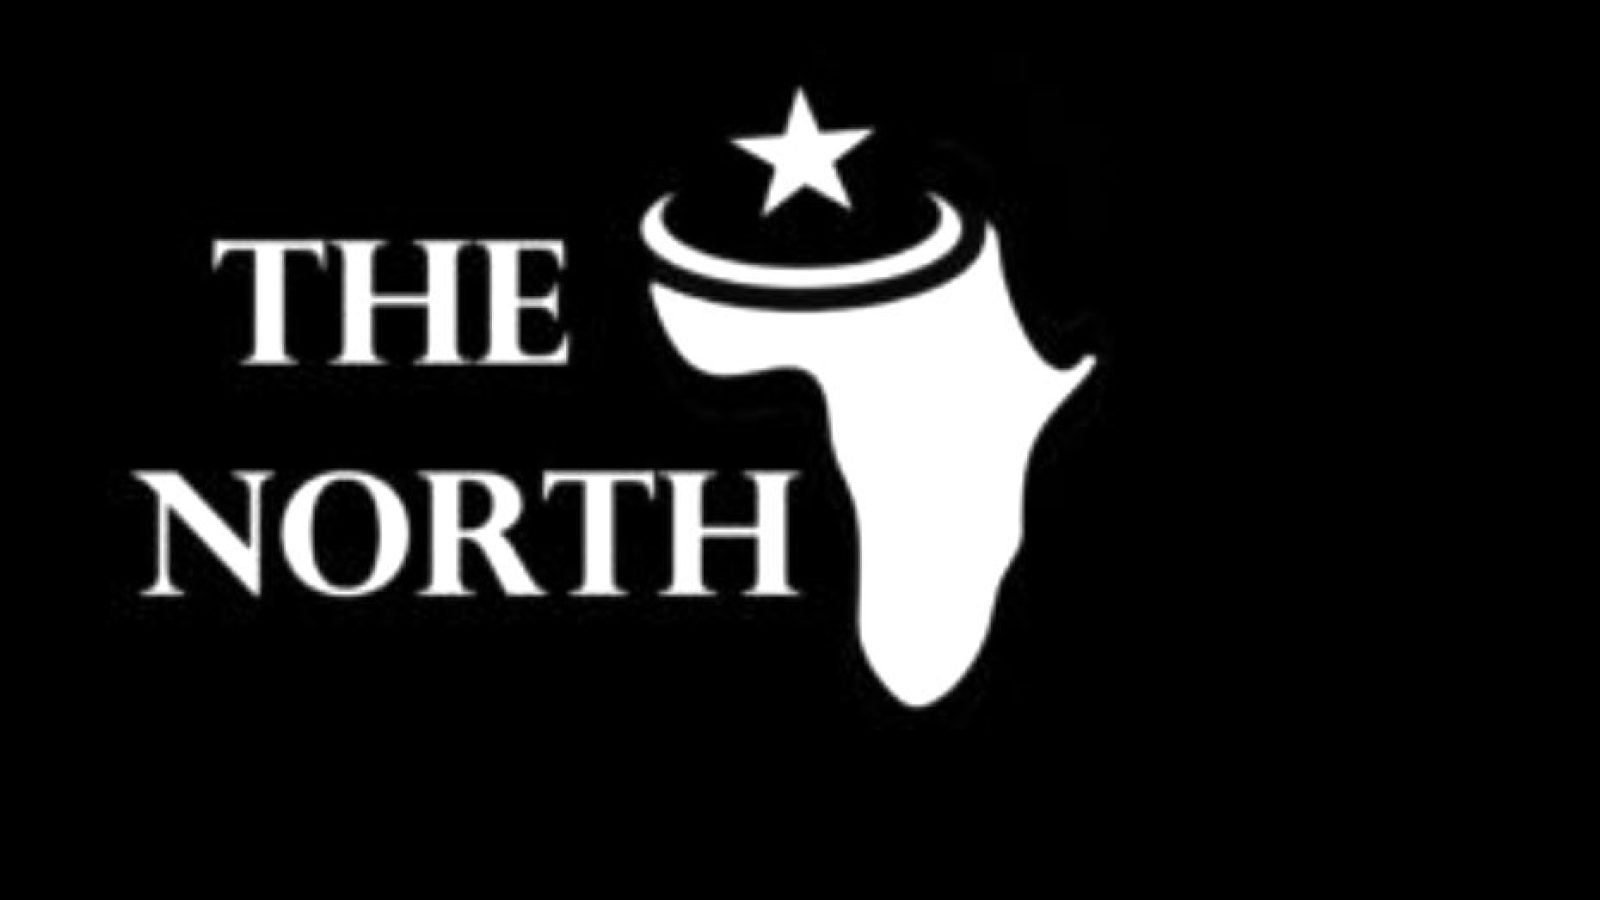 The North African logo